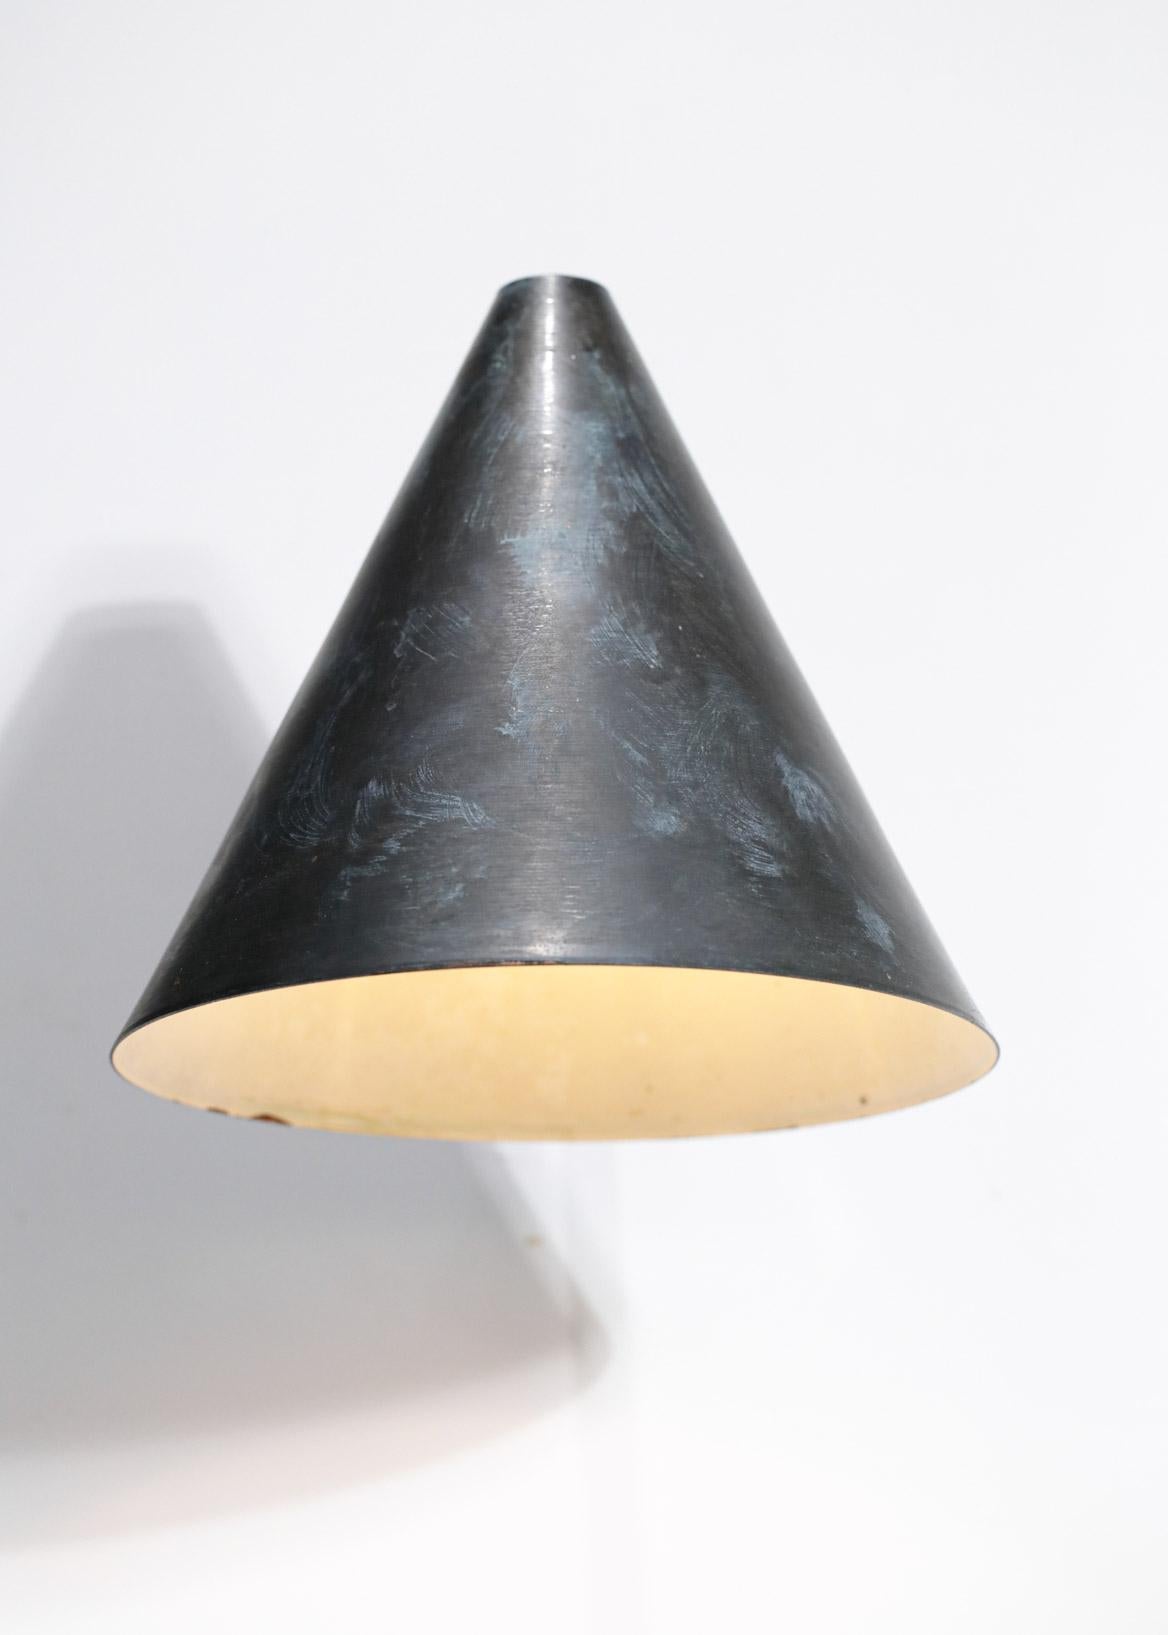 Swedish Large Wall Lamp Hans Agne Jakobsson Tratten Patina Years 60, F590 For Sale